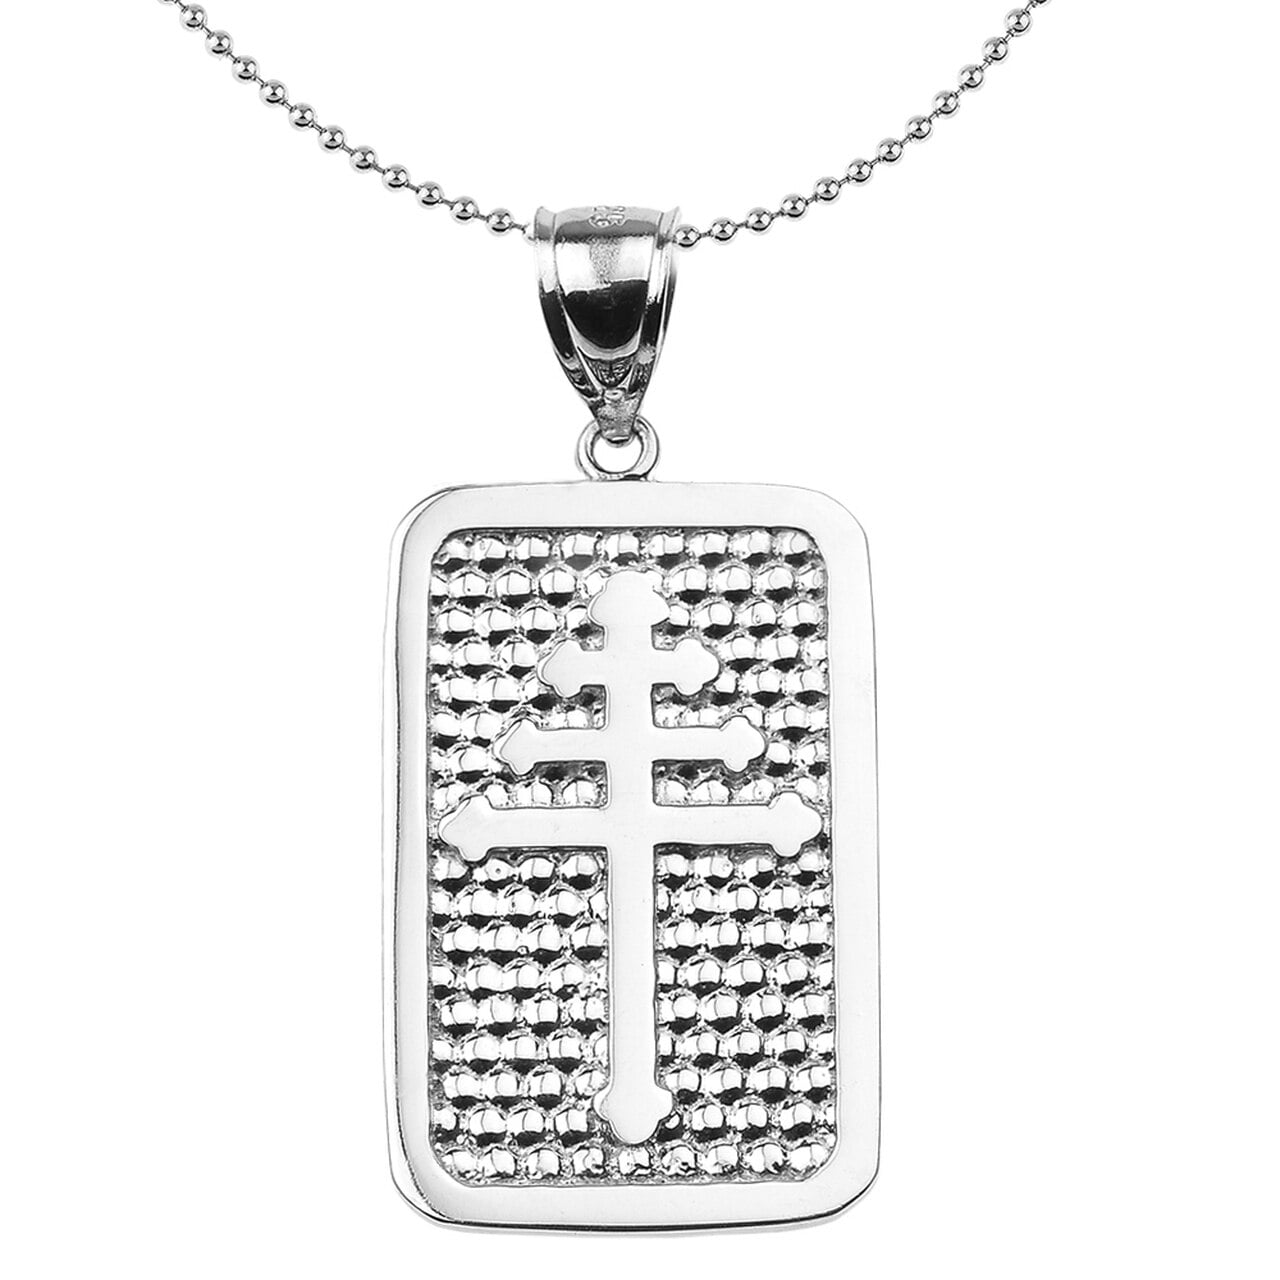 STERLING SILVER MARONITE CROSS ENGRAVABLE PENDANT NECKLACE - Pendant with  20